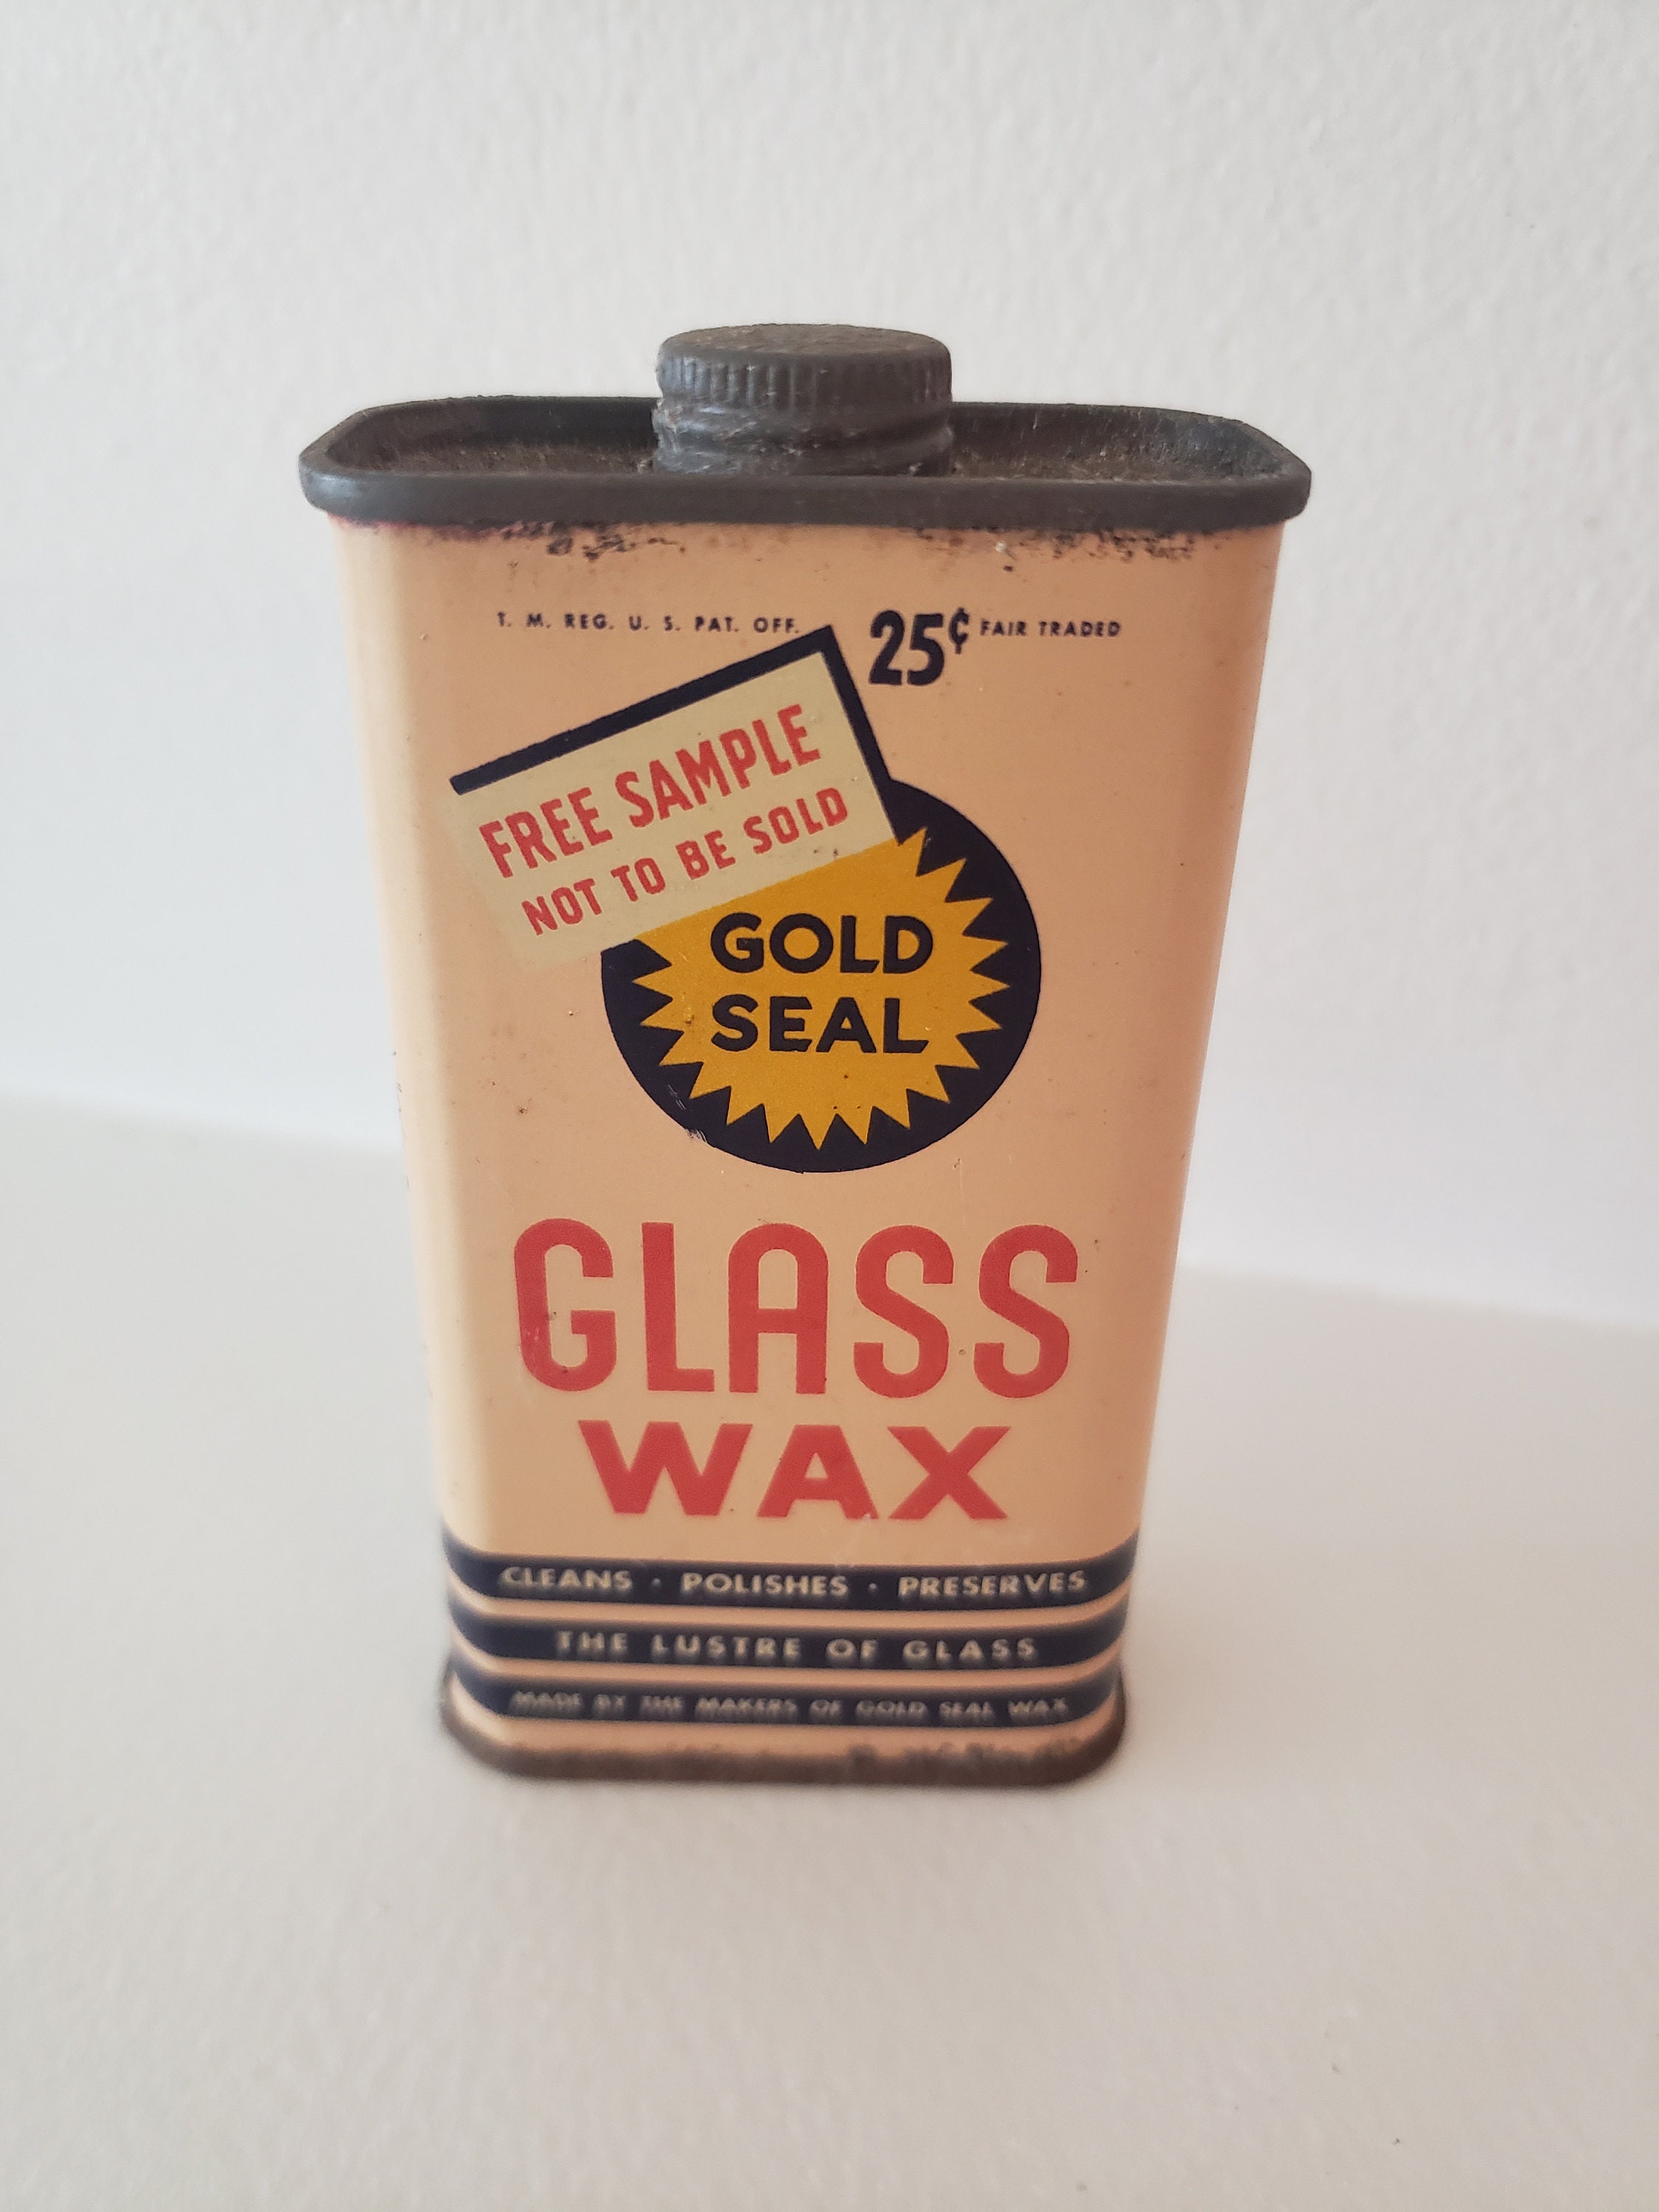 Vintage Gold Seal Glass Wax Can. Retro Style Cans, Rusty Can, Polish  Advertisement, Hardware Store Decor, Advertising Tin, Decorative Tin. 